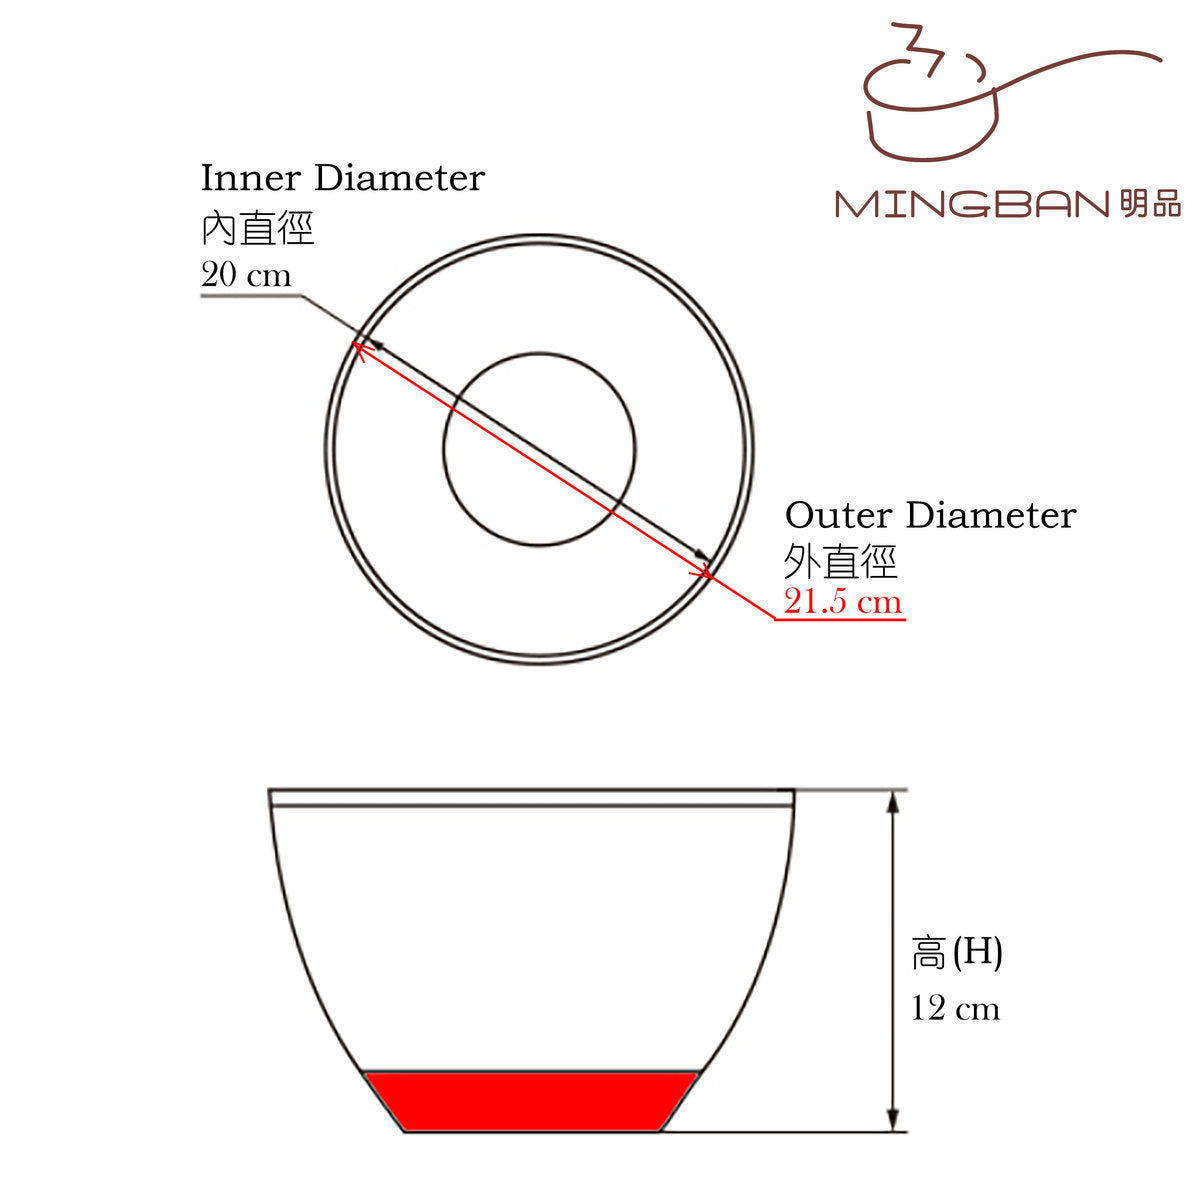 20cm Mixing Bowl with non-slip silicone bottom and inner measurement marks - 0.5L, 1.0L, 1.5L, 2.0L, 2.5L